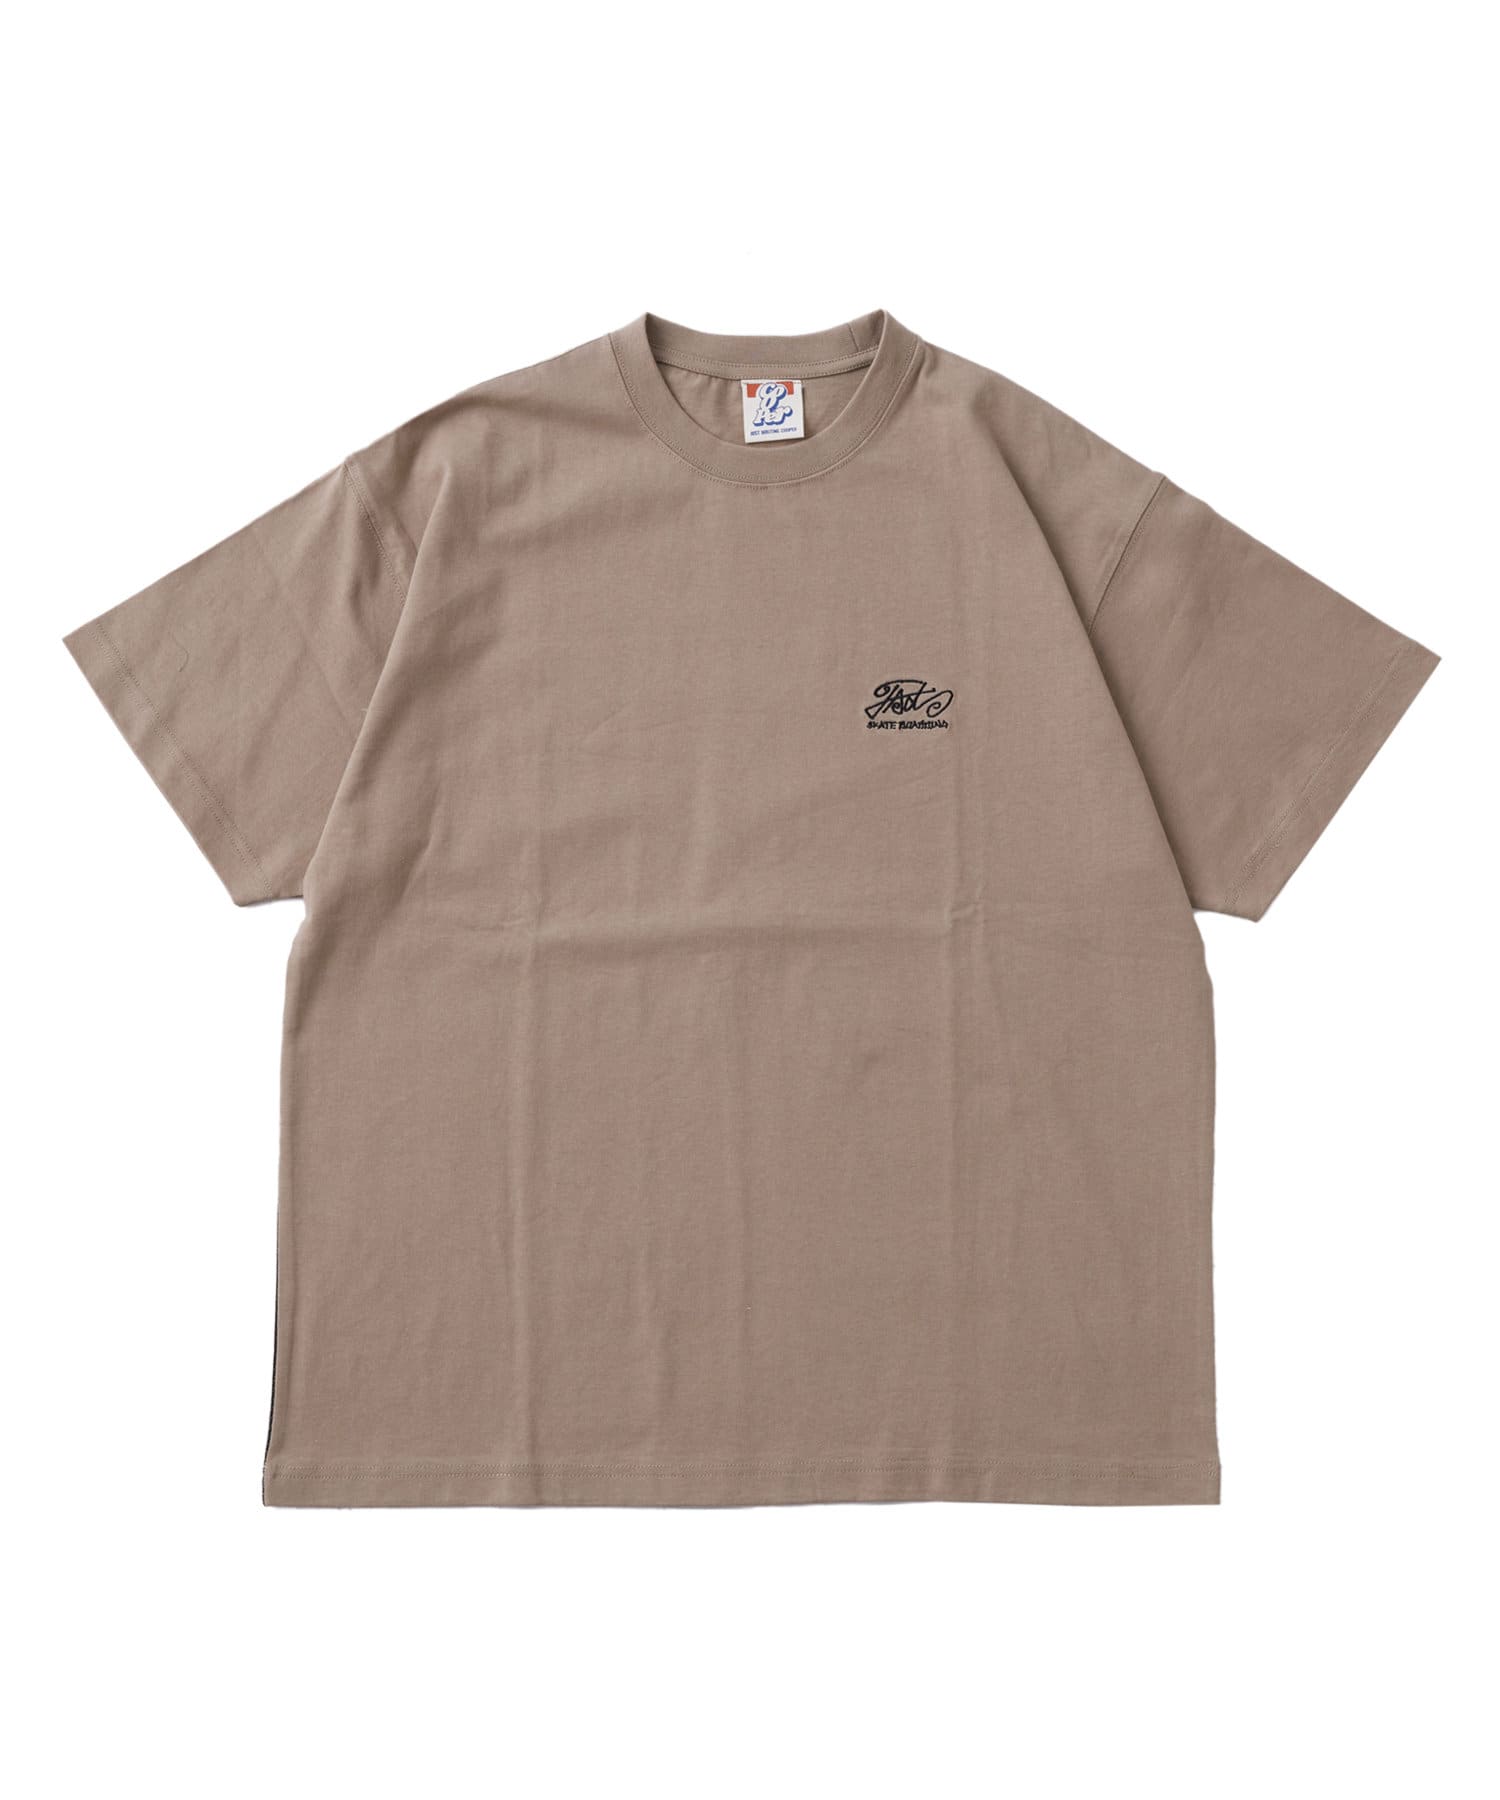 WHO’S WHO gallery(フーズフーギャラリー) COOPER FACT ビリヤードビッグフォトTEE